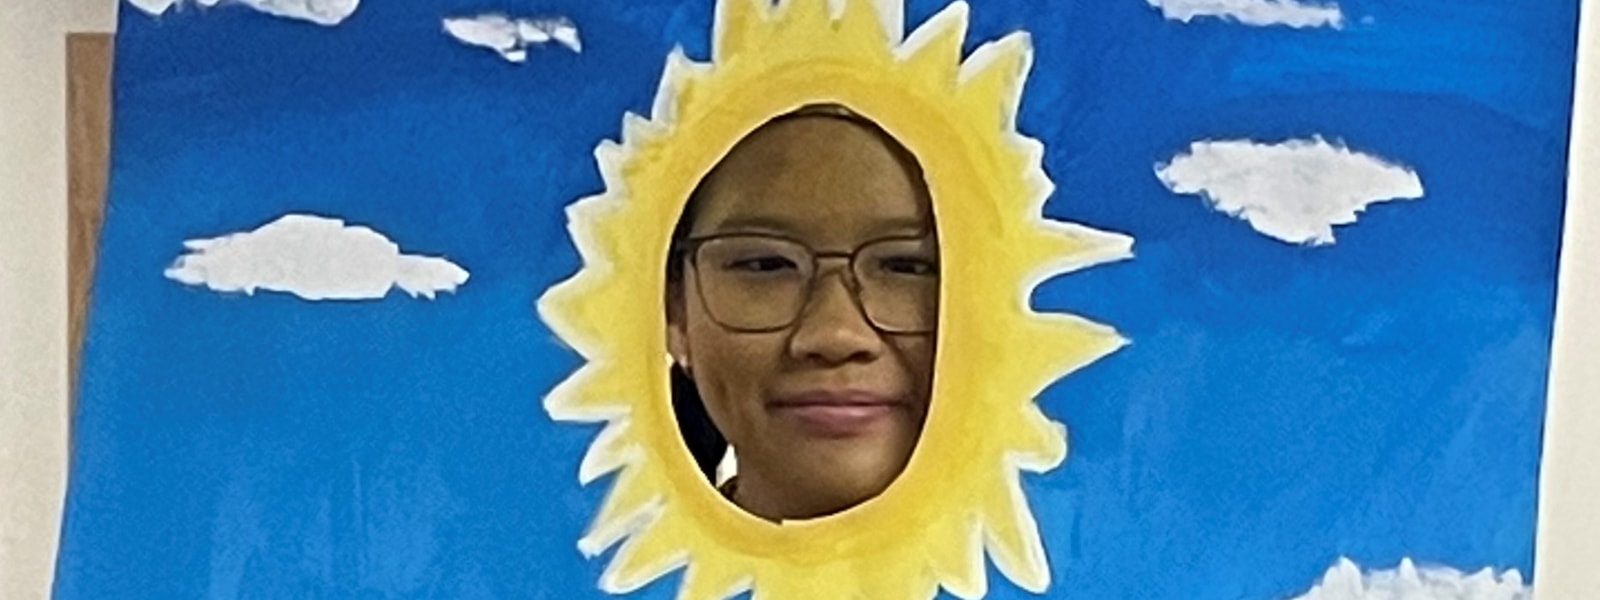 Student wearing a picture with a sun and clouds